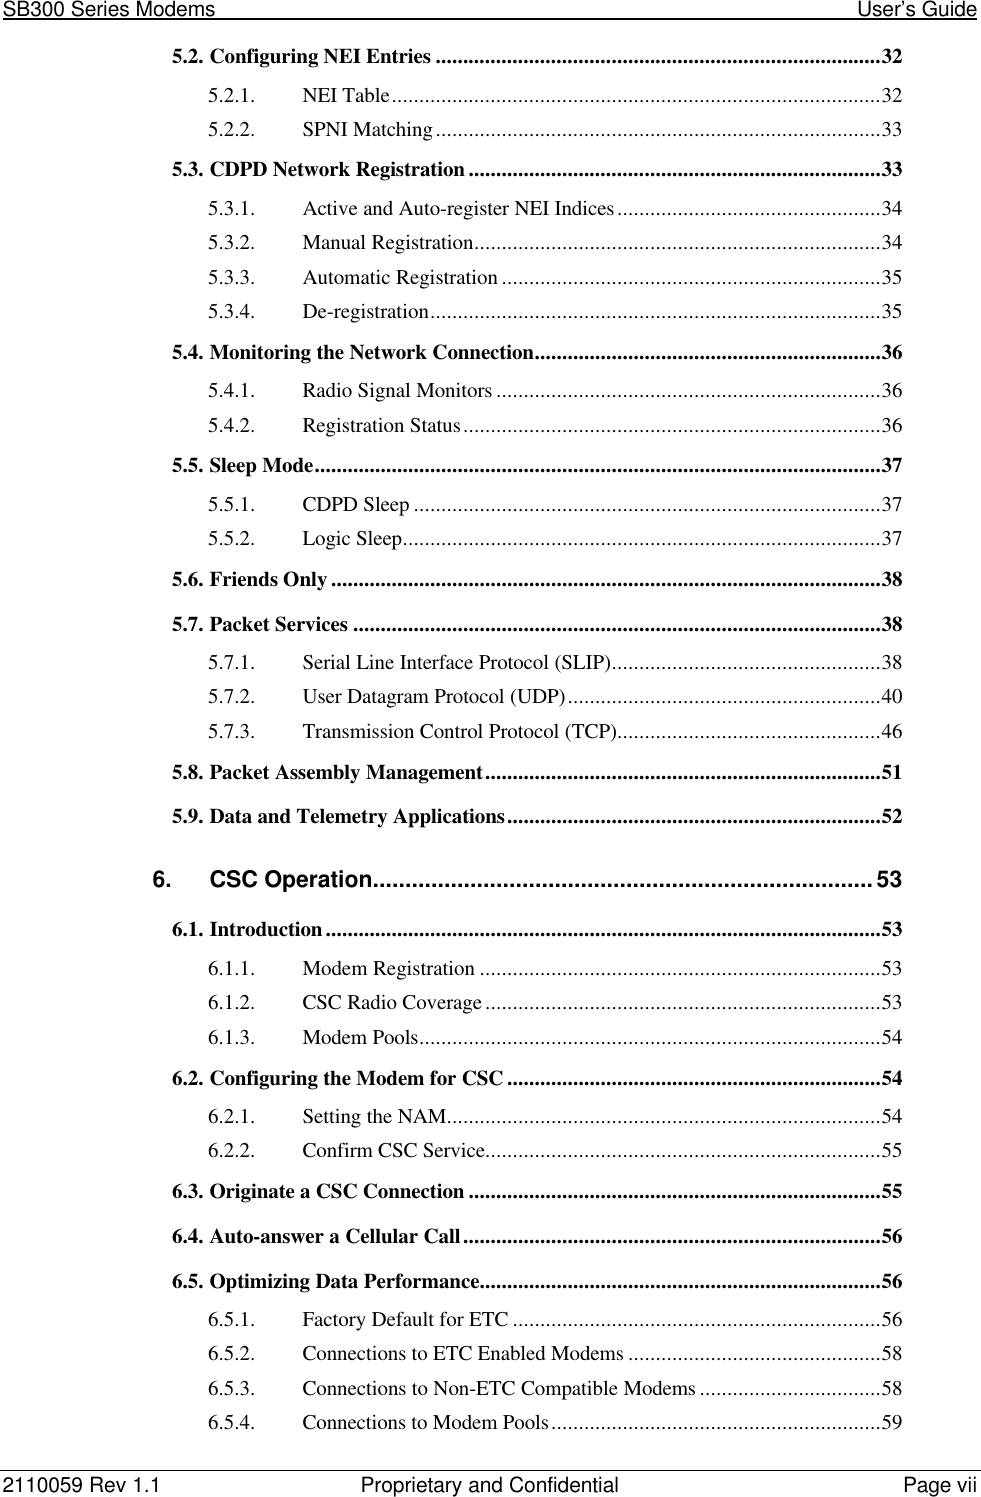 SB300 Series Modems                                                                                                            User’s Guide2110059 Rev 1.1 Proprietary and Confidential Page vii5.2. Configuring NEI Entries .................................................................................325.2.1. NEI Table.........................................................................................325.2.2. SPNI Matching.................................................................................335.3. CDPD Network Registration ...........................................................................335.3.1. Active and Auto-register NEI Indices................................................345.3.2. Manual Registration..........................................................................345.3.3. Automatic Registration .....................................................................355.3.4. De-registration..................................................................................355.4. Monitoring the Network Connection...............................................................365.4.1. Radio Signal Monitors ......................................................................365.4.2. Registration Status............................................................................365.5. Sleep Mode.......................................................................................................375.5.1. CDPD Sleep .....................................................................................375.5.2. Logic Sleep.......................................................................................375.6. Friends Only ....................................................................................................385.7. Packet Services ................................................................................................385.7.1. Serial Line Interface Protocol (SLIP).................................................385.7.2. User Datagram Protocol (UDP).........................................................405.7.3. Transmission Control Protocol (TCP)................................................465.8. Packet Assembly Management........................................................................515.9. Data and Telemetry Applications....................................................................526. CSC Operation.............................................................................536.1. Introduction.....................................................................................................536.1.1. Modem Registration .........................................................................536.1.2. CSC Radio Coverage........................................................................536.1.3. Modem Pools....................................................................................546.2. Configuring the Modem for CSC ....................................................................546.2.1. Setting the NAM...............................................................................546.2.2. Confirm CSC Service........................................................................556.3. Originate a CSC Connection ...........................................................................556.4. Auto-answer a Cellular Call............................................................................566.5. Optimizing Data Performance.........................................................................566.5.1. Factory Default for ETC ...................................................................566.5.2. Connections to ETC Enabled Modems ..............................................586.5.3. Connections to Non-ETC Compatible Modems .................................586.5.4. Connections to Modem Pools............................................................59